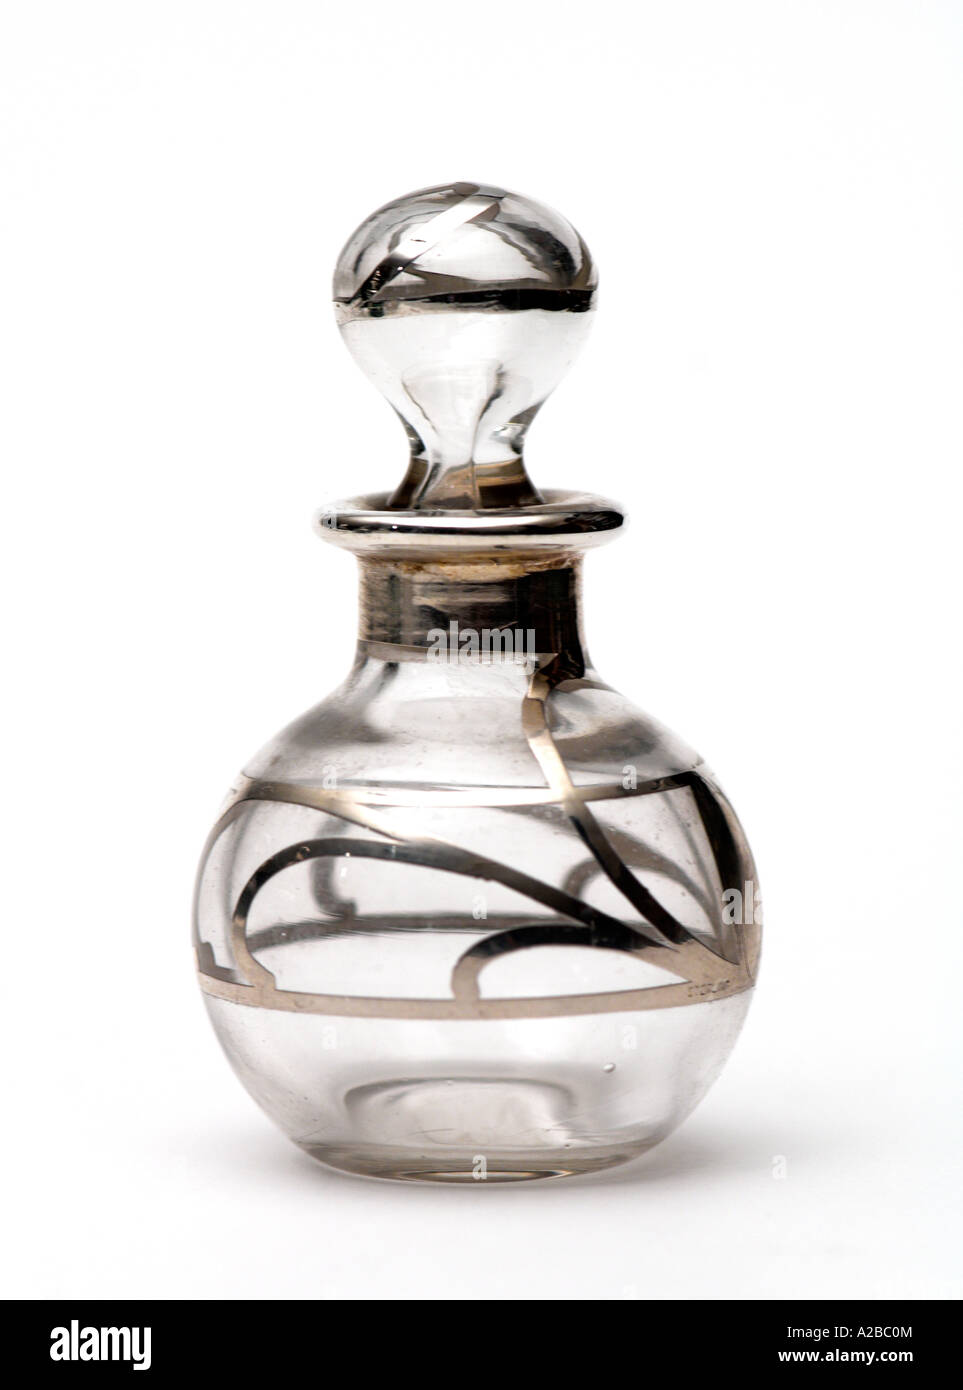 A glass with silver overlay perfume bottle c 1905 Stock Photo